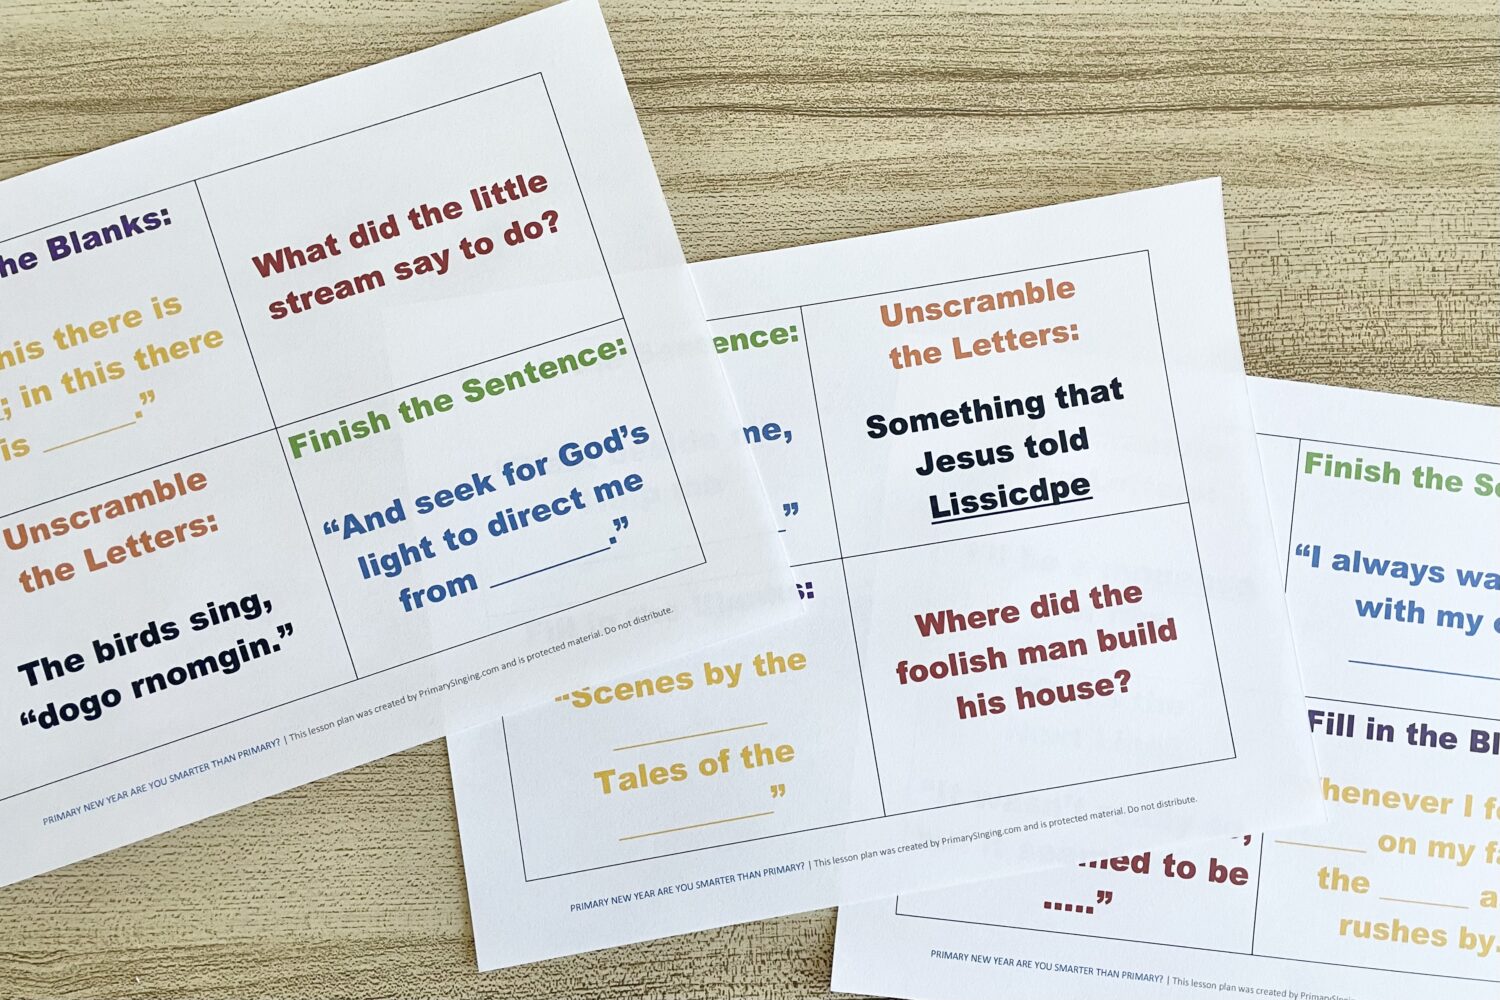 Primary New Year Are You Smarter Than Primary - Use this fun song quiz game to review primary songs for the new year with printable song helps for LDS Primary Music Leaders.